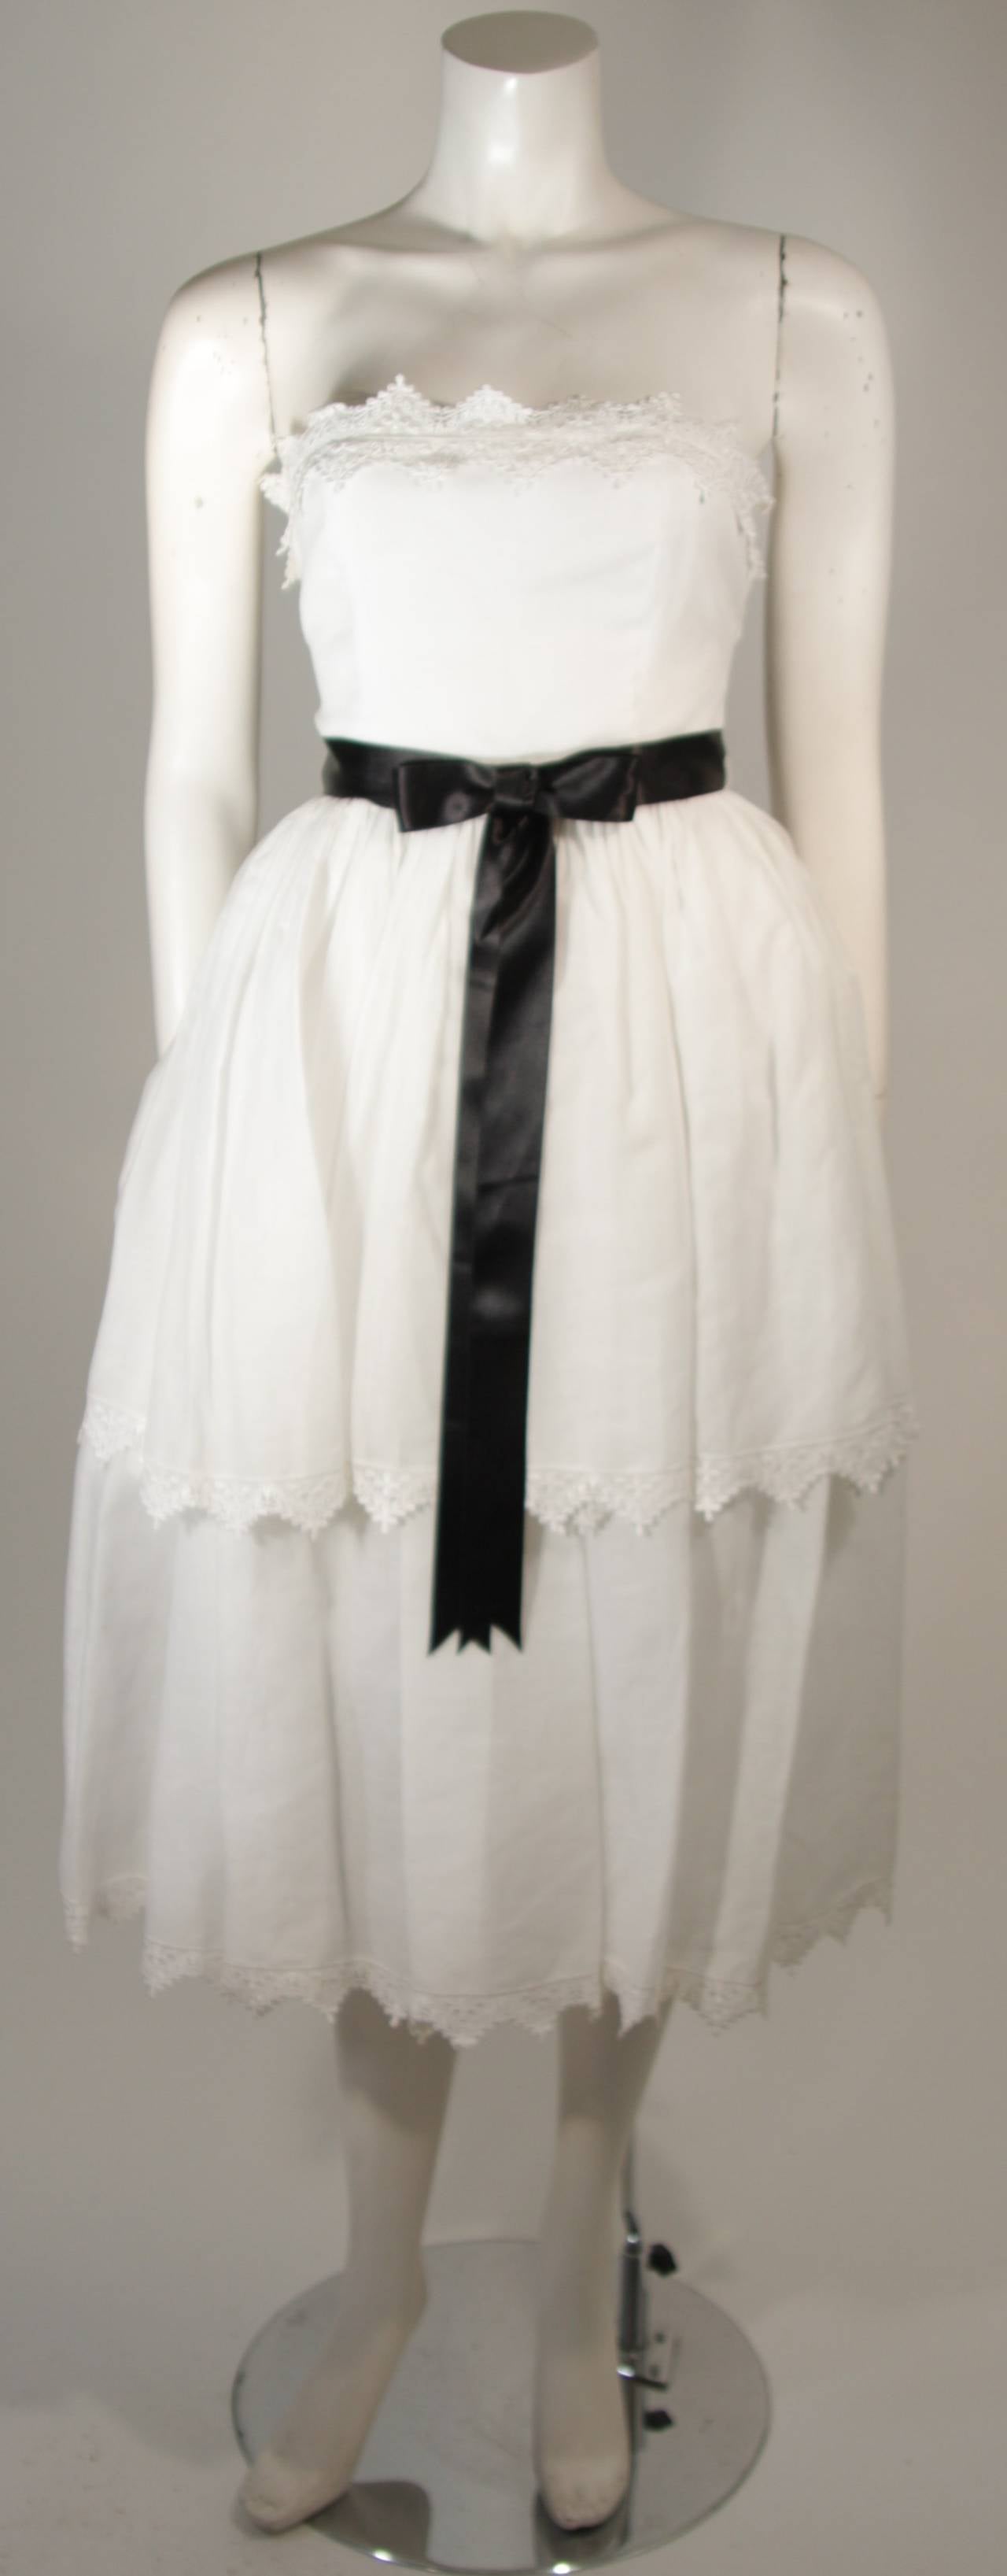 This Albert Capraro dress is composed of a white cotton and features a lace trim. There is a center back zipper closure. In excellent condition. 

**Please cross-reference measurements for personal accuracy. The size listed in the description box